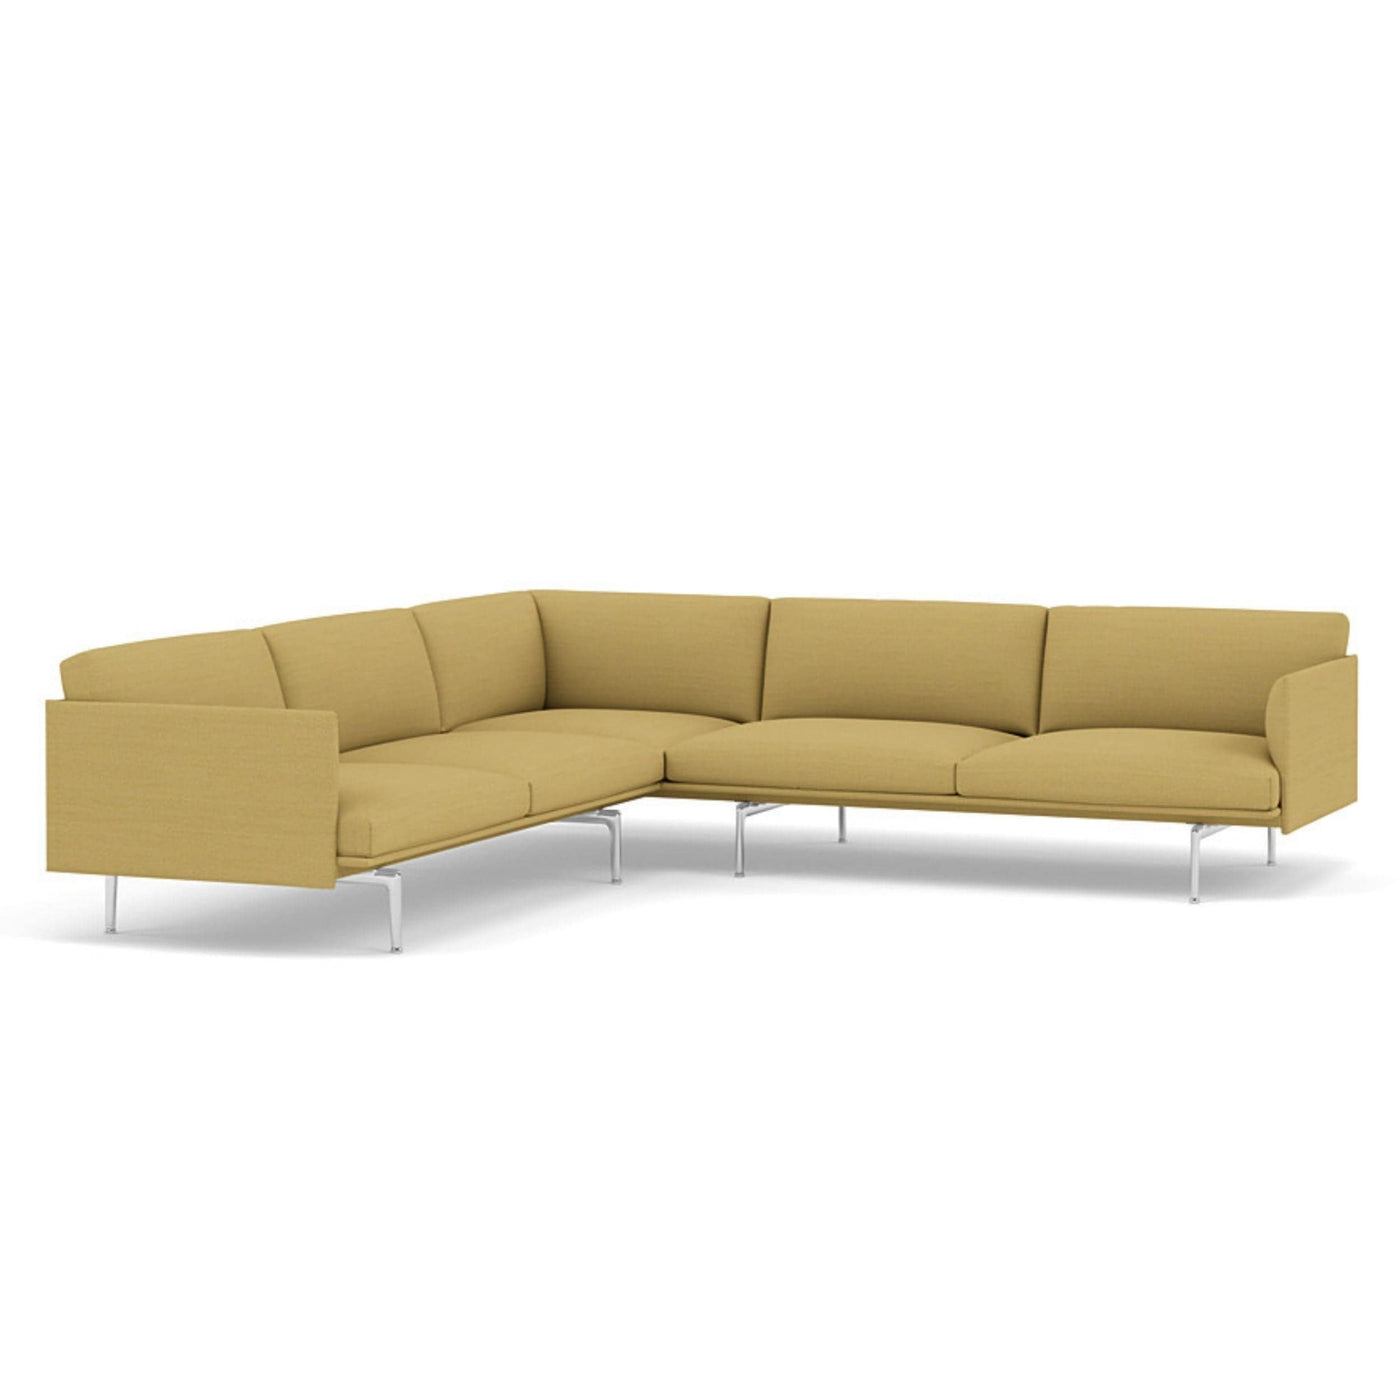 muuto outline corner sofa in hallingdal 407 yellow and polished aluminium legs. Made to order from someday designs. #colour_hallingdal-407